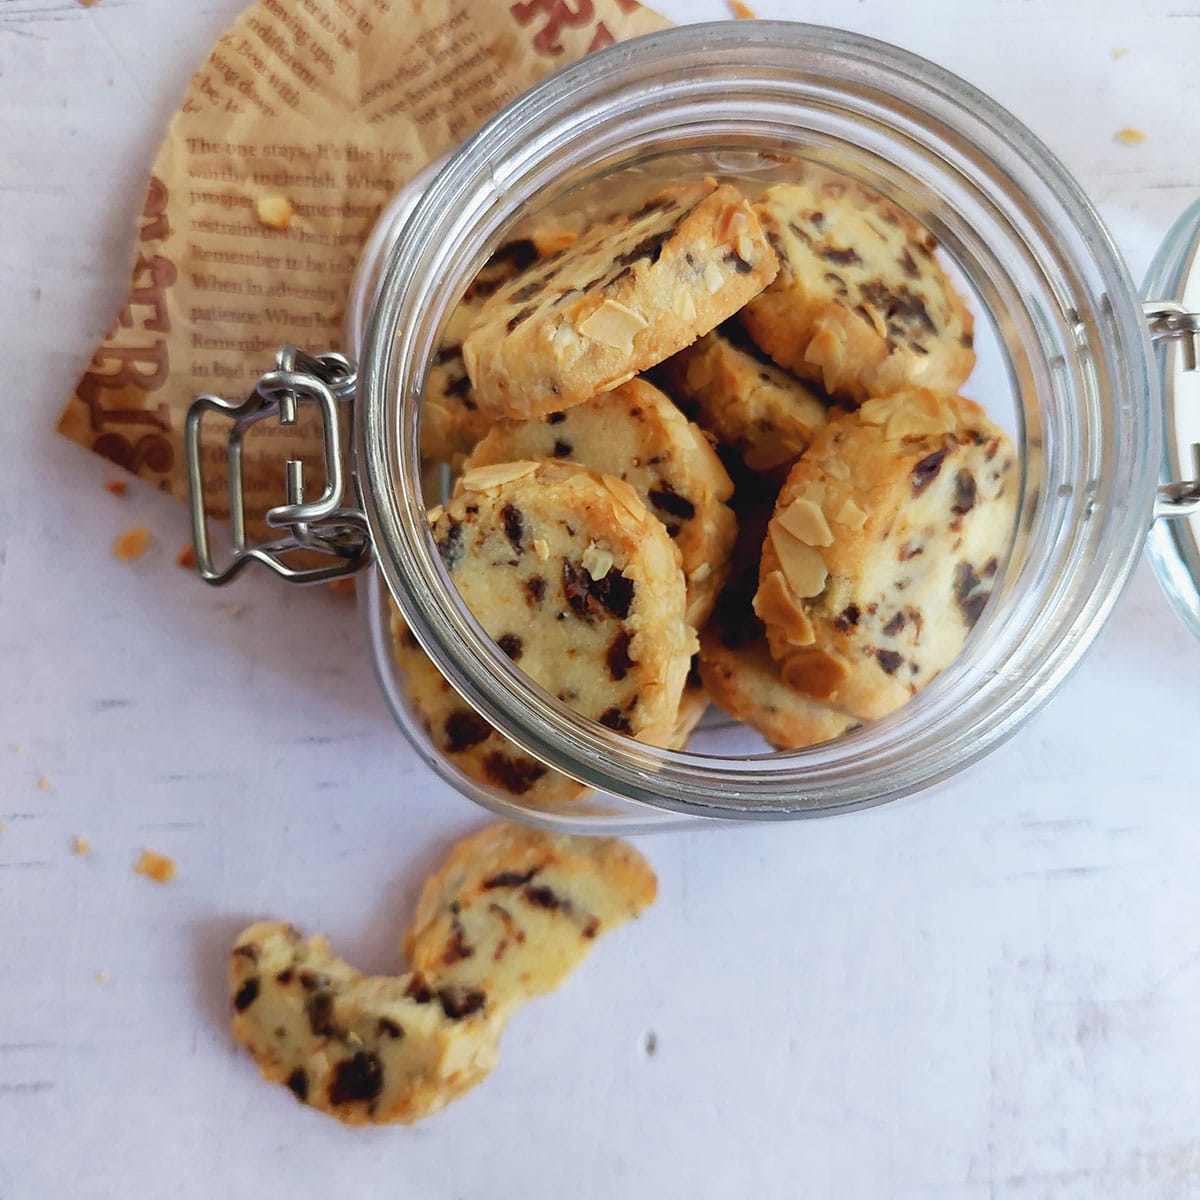 Once completely cool, store the cookies in an airtight jar for up to 5 days.